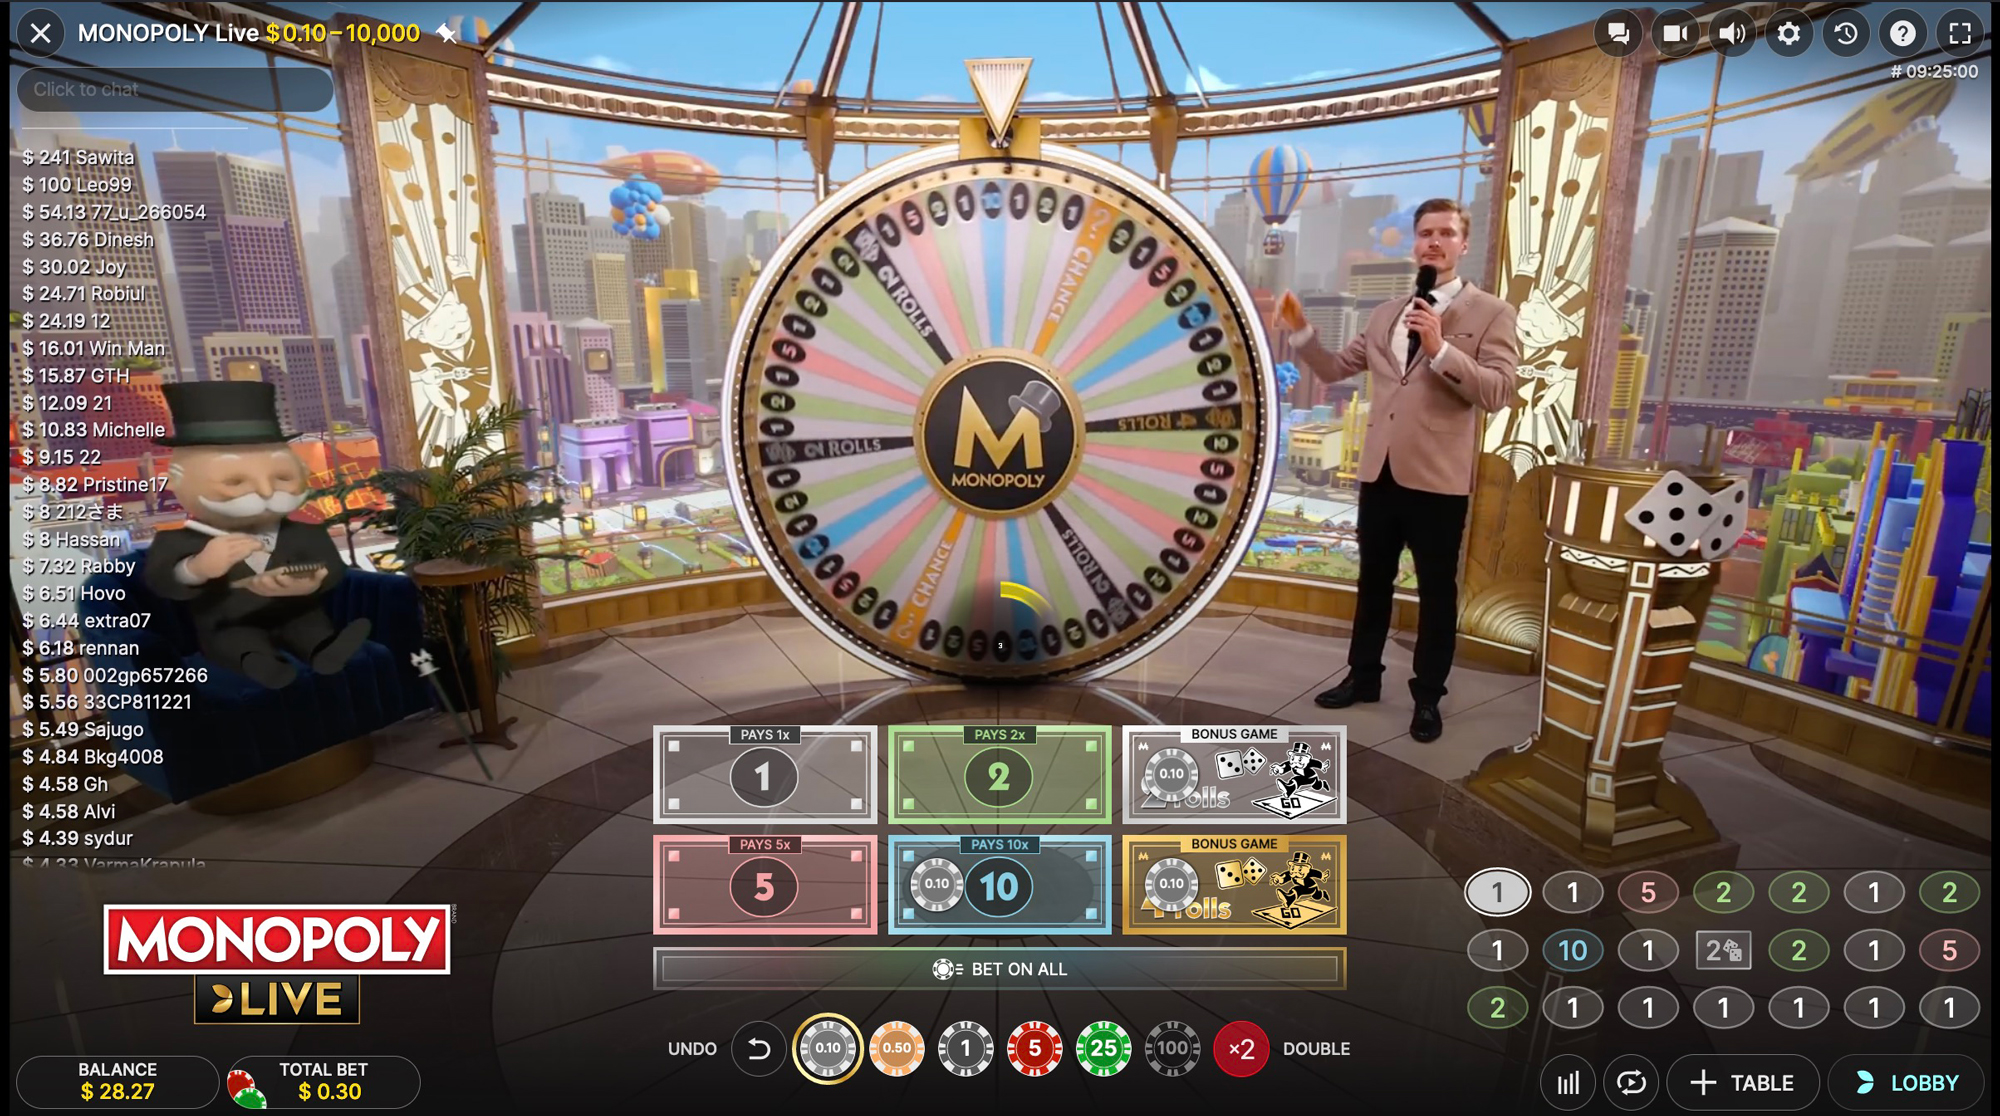 Monopoly Live Game interface